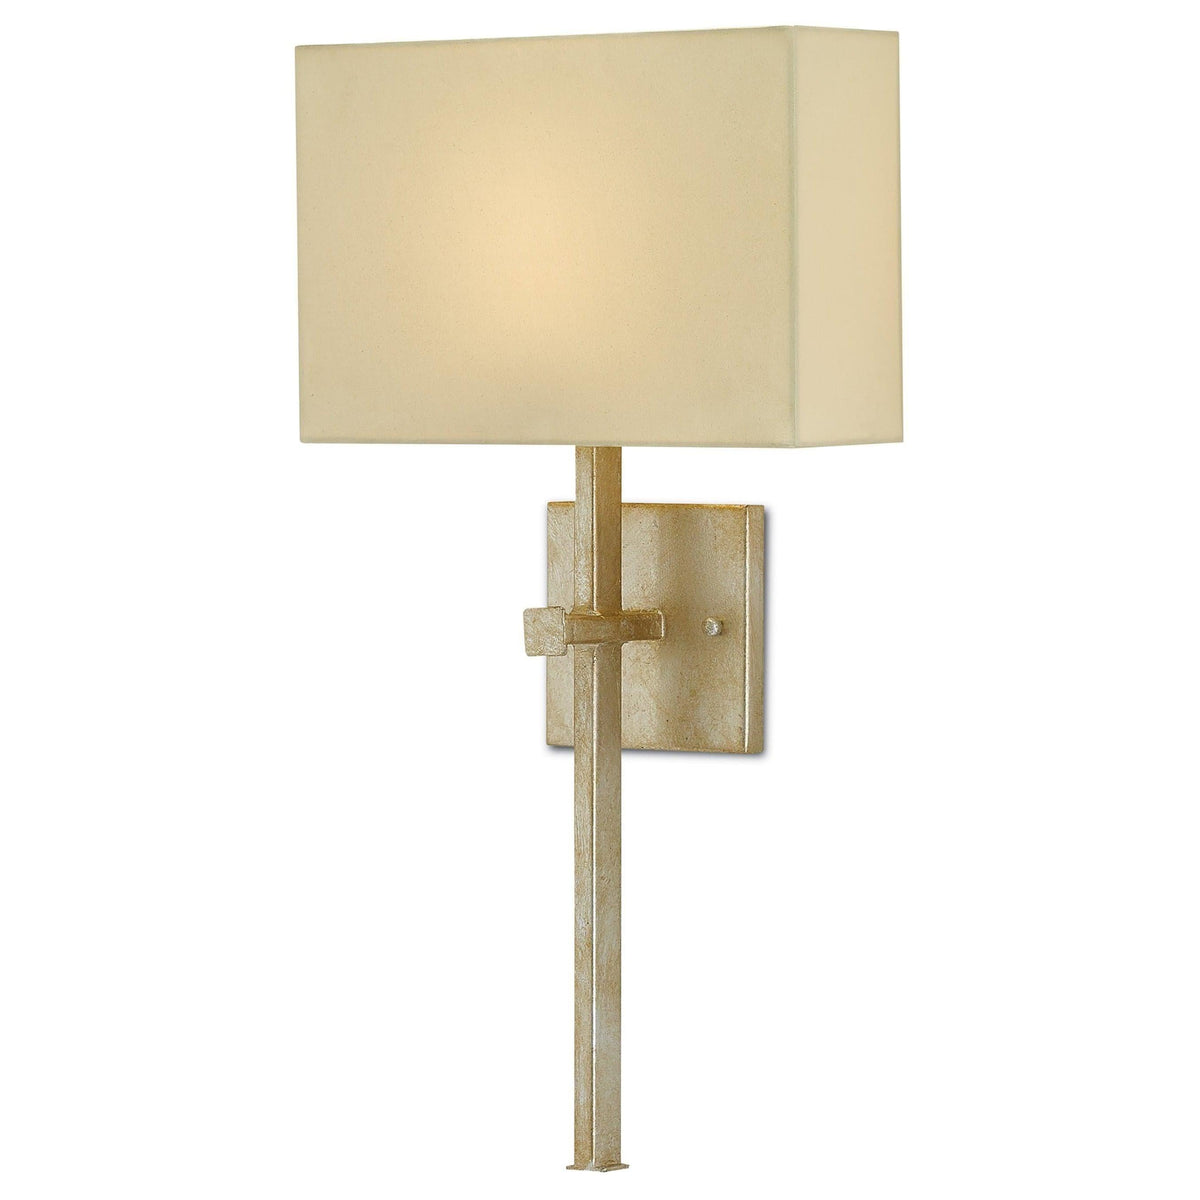 Currey and Company - Ashdown Wall Sconce - 5900-0004 | Montreal Lighting & Hardware